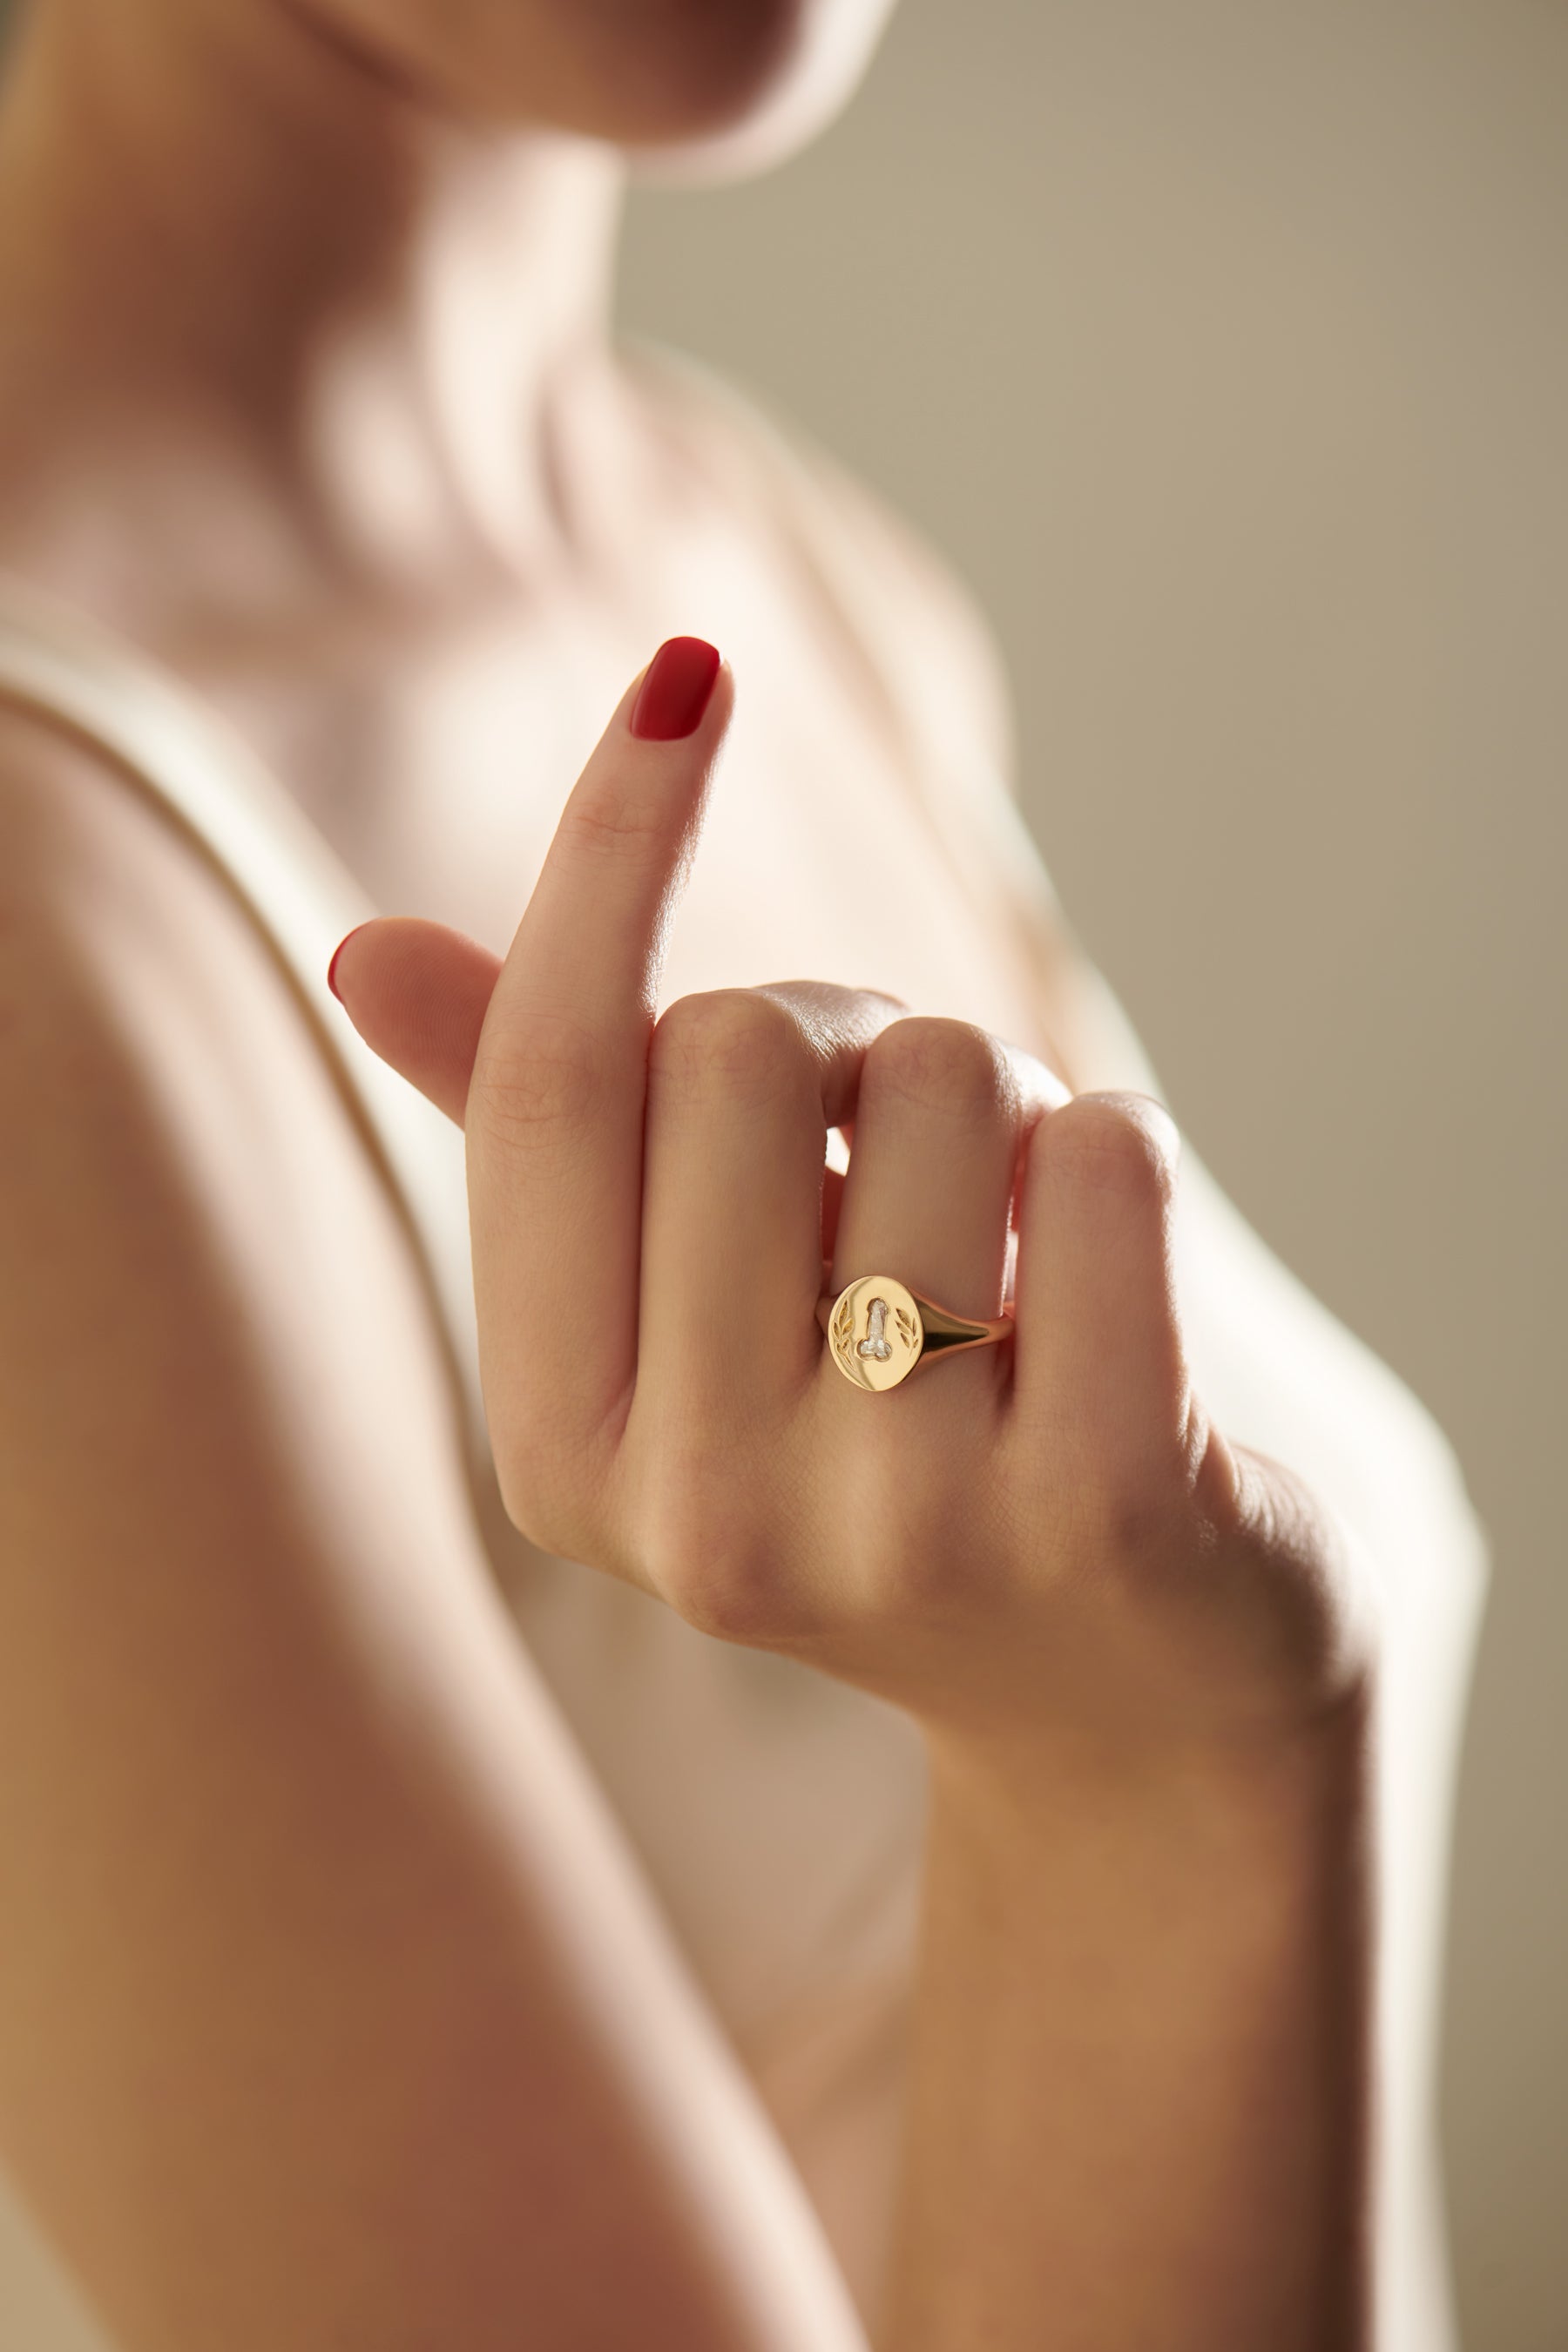 Why women have banded together for ring-shaming online | Salon.com